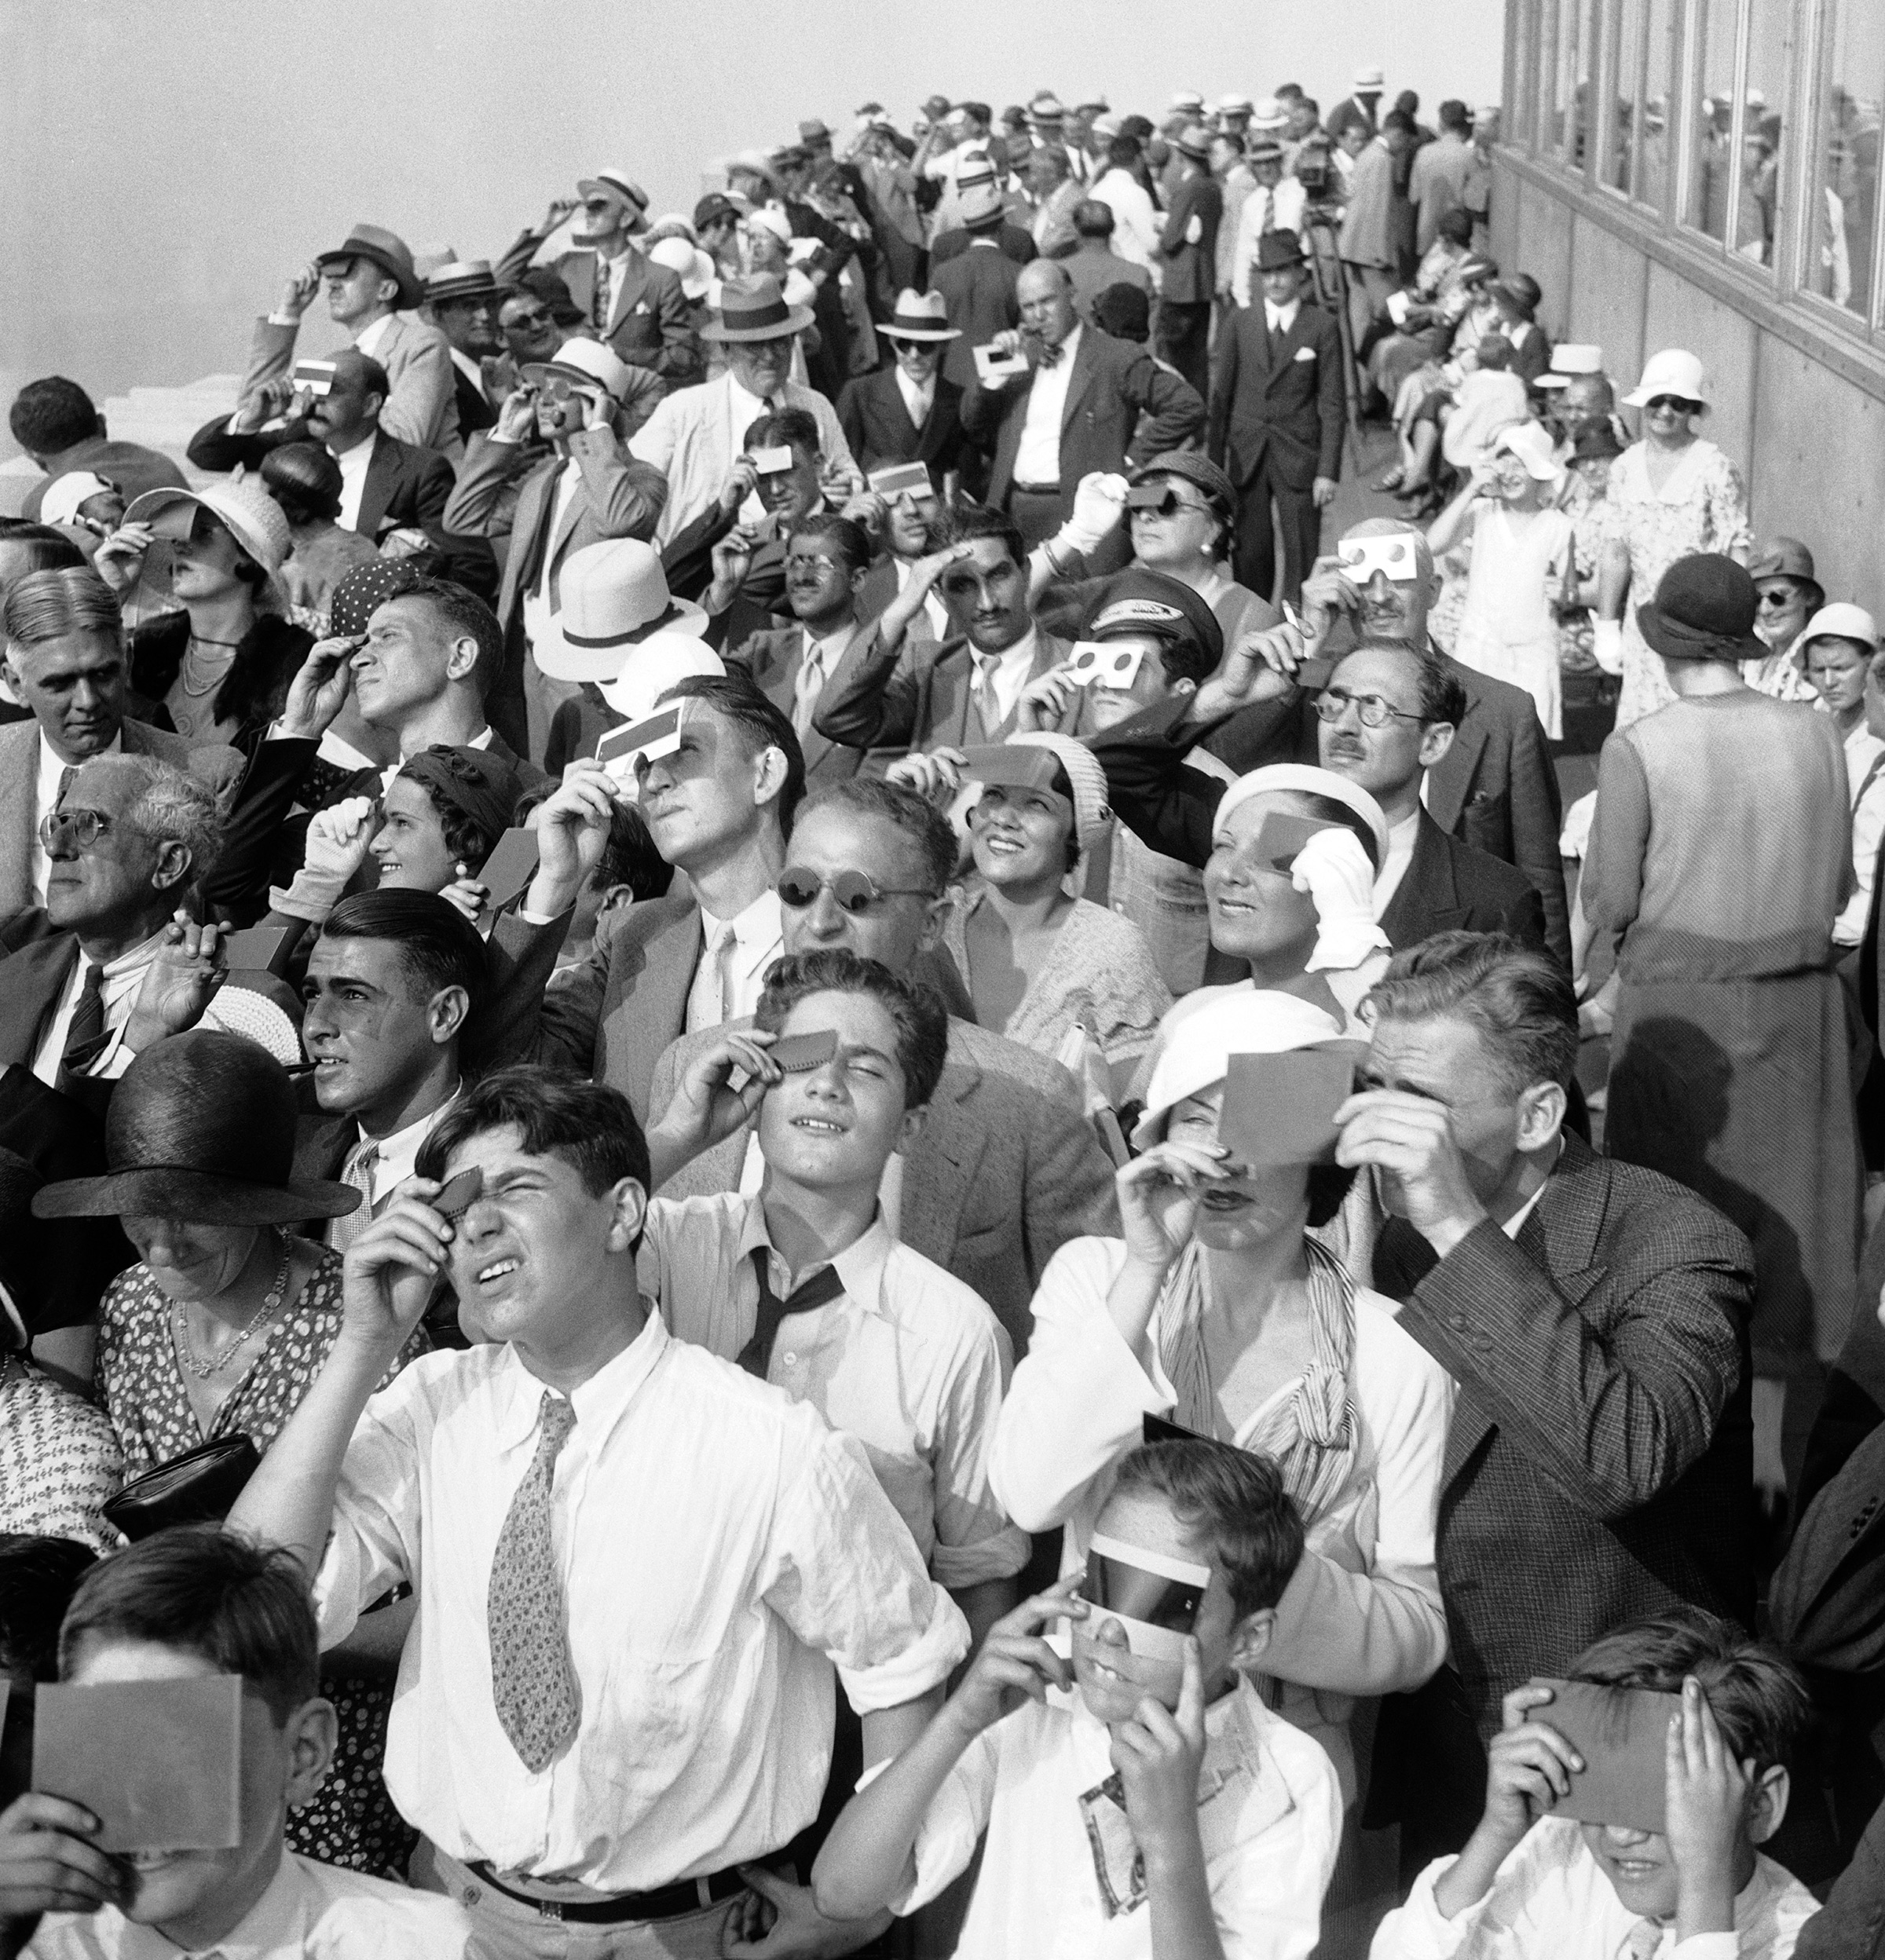 Eclipse watchers squint through protective film as they view a partial eclipse of the sun from the top deck of the Empire State Building on Aug. 31, 1932. (AP)